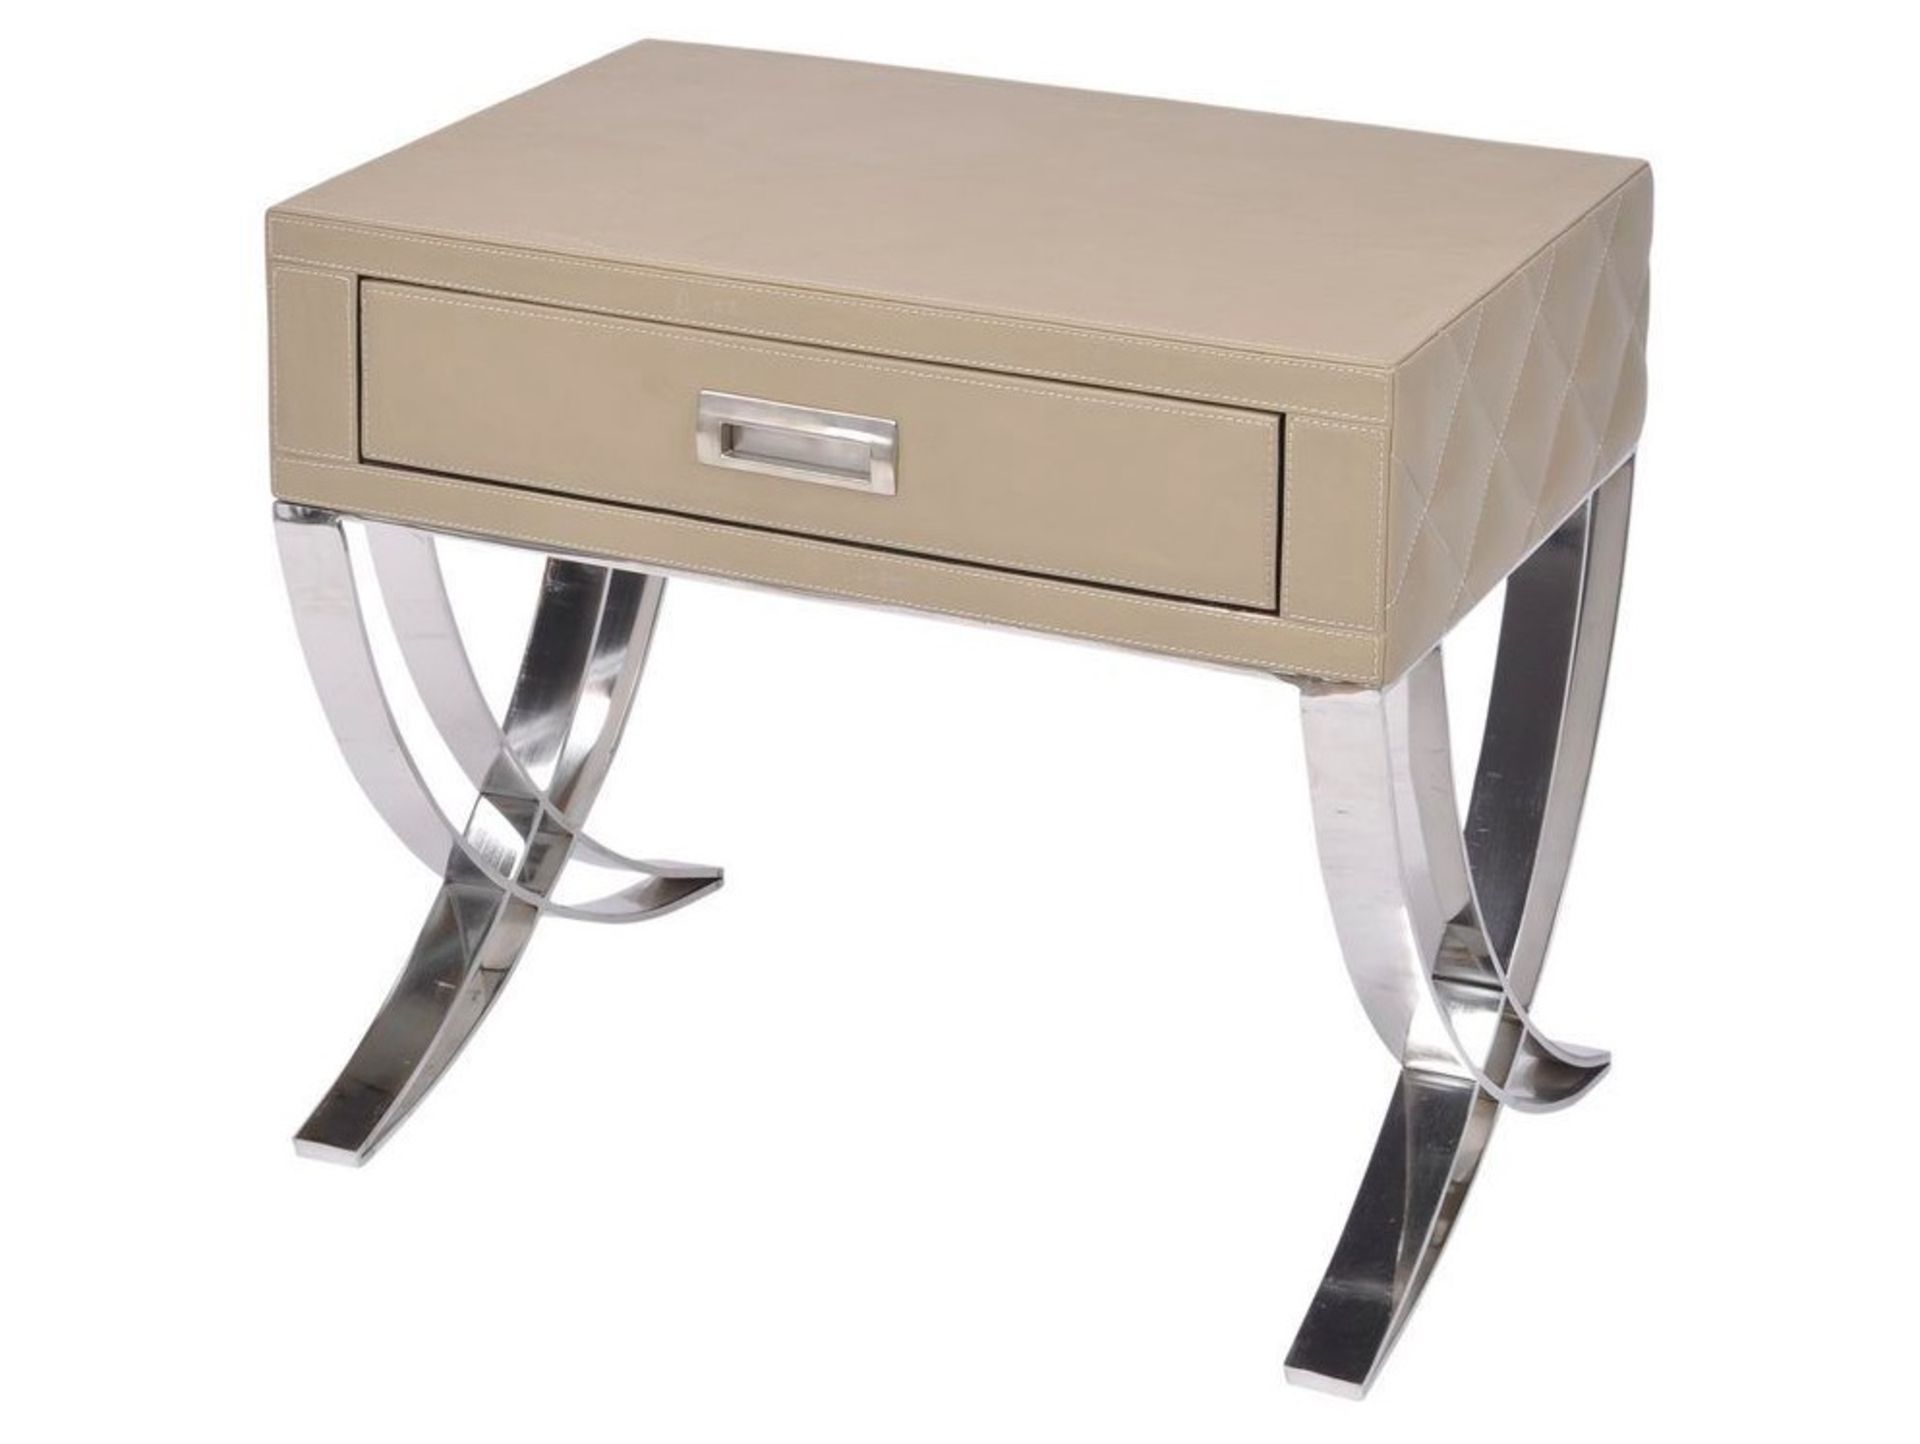 Moseley Beige Leather Side Table with Drawer This beige leather side table, with its neutral tone